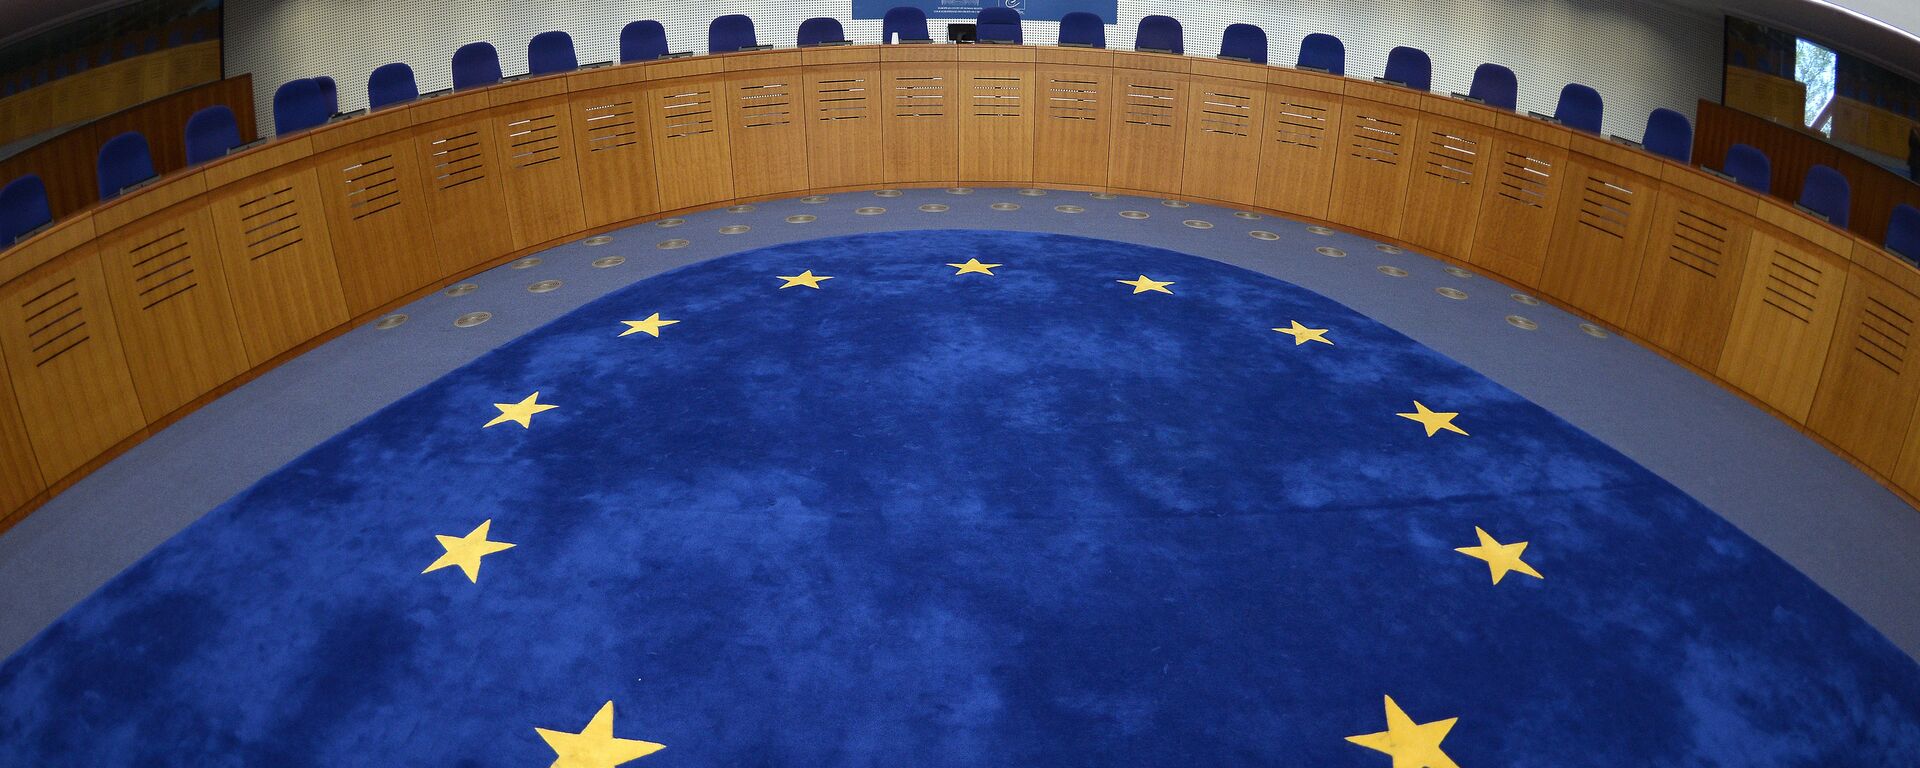 Picture taken on April 23, 2015 shows the audience room of the European Court for Human Rights, in Strasbourg, eastern France - Sputnik International, 1920, 22.07.2021